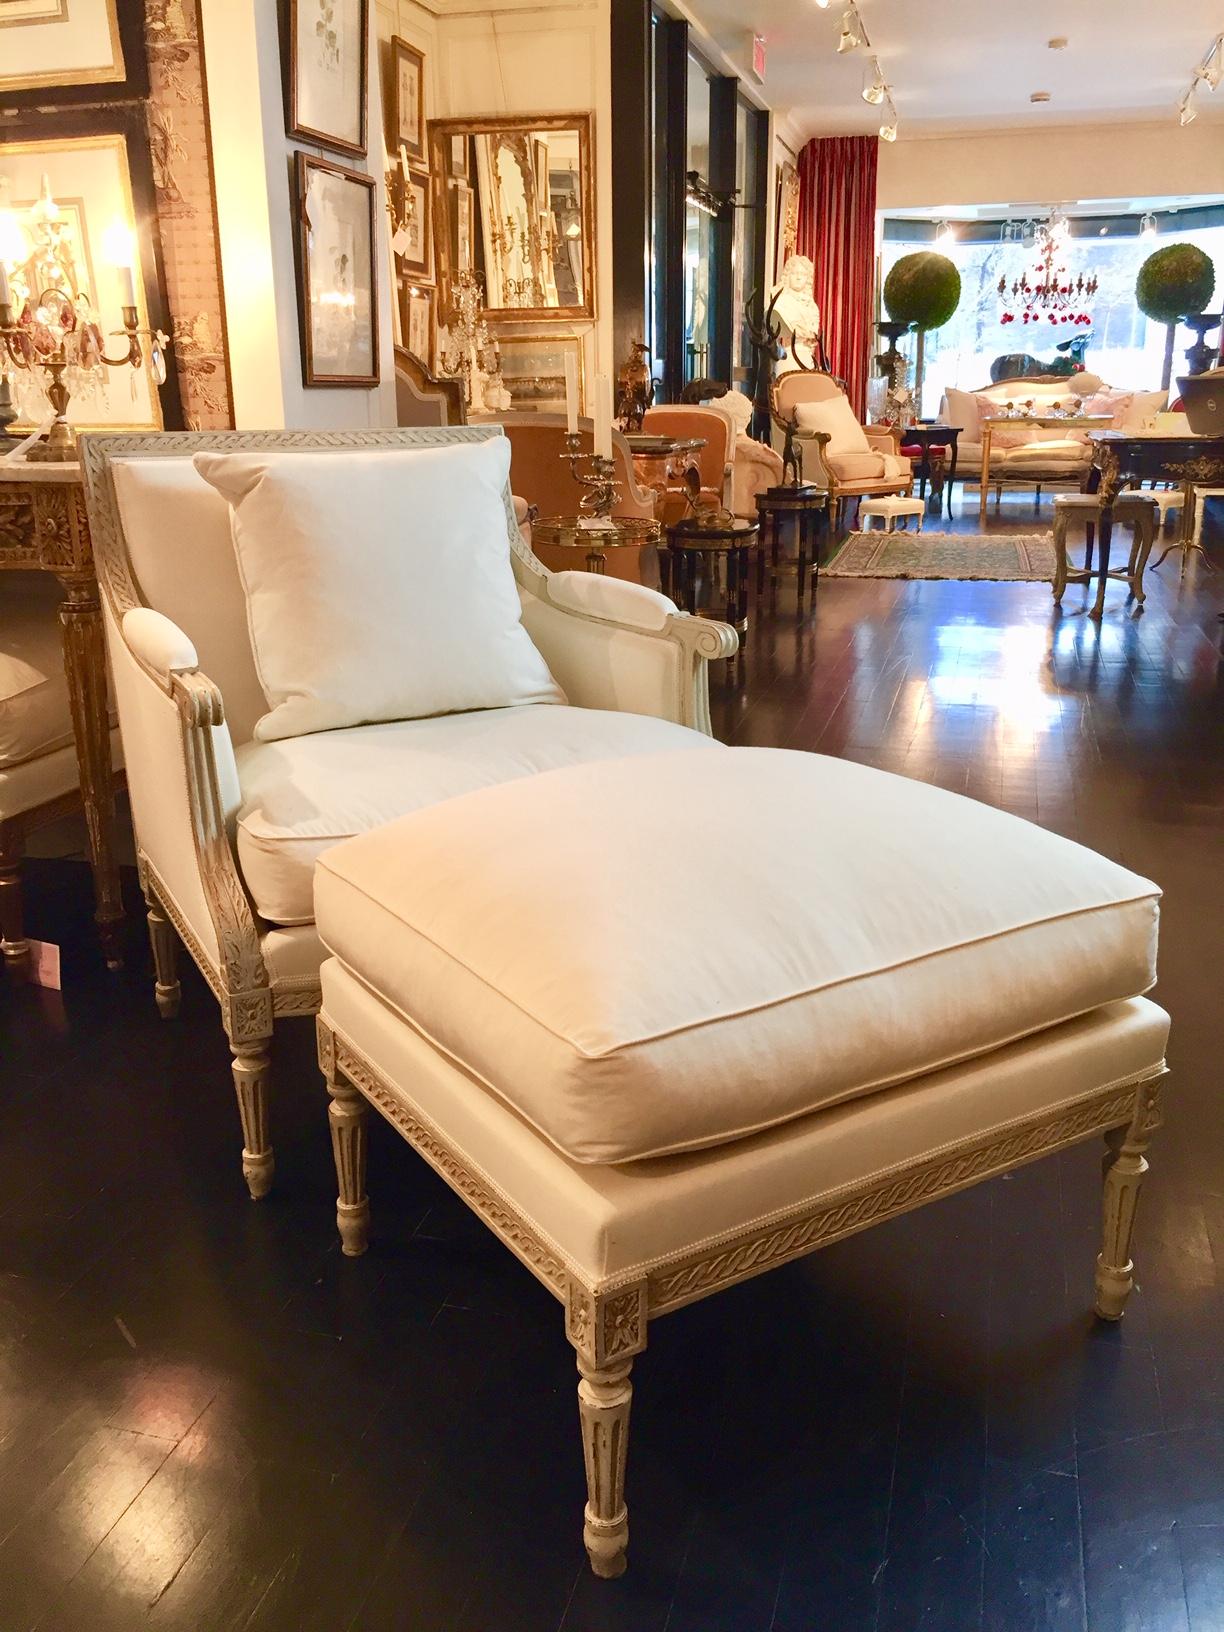 French Louis XVI style footstool repose pied, patinated in trianon grey
Large footstool, highly decorative, can also be used as extra seating or as an ottoman instead of a coffee table. A great complement to any room.
More than one available. Price